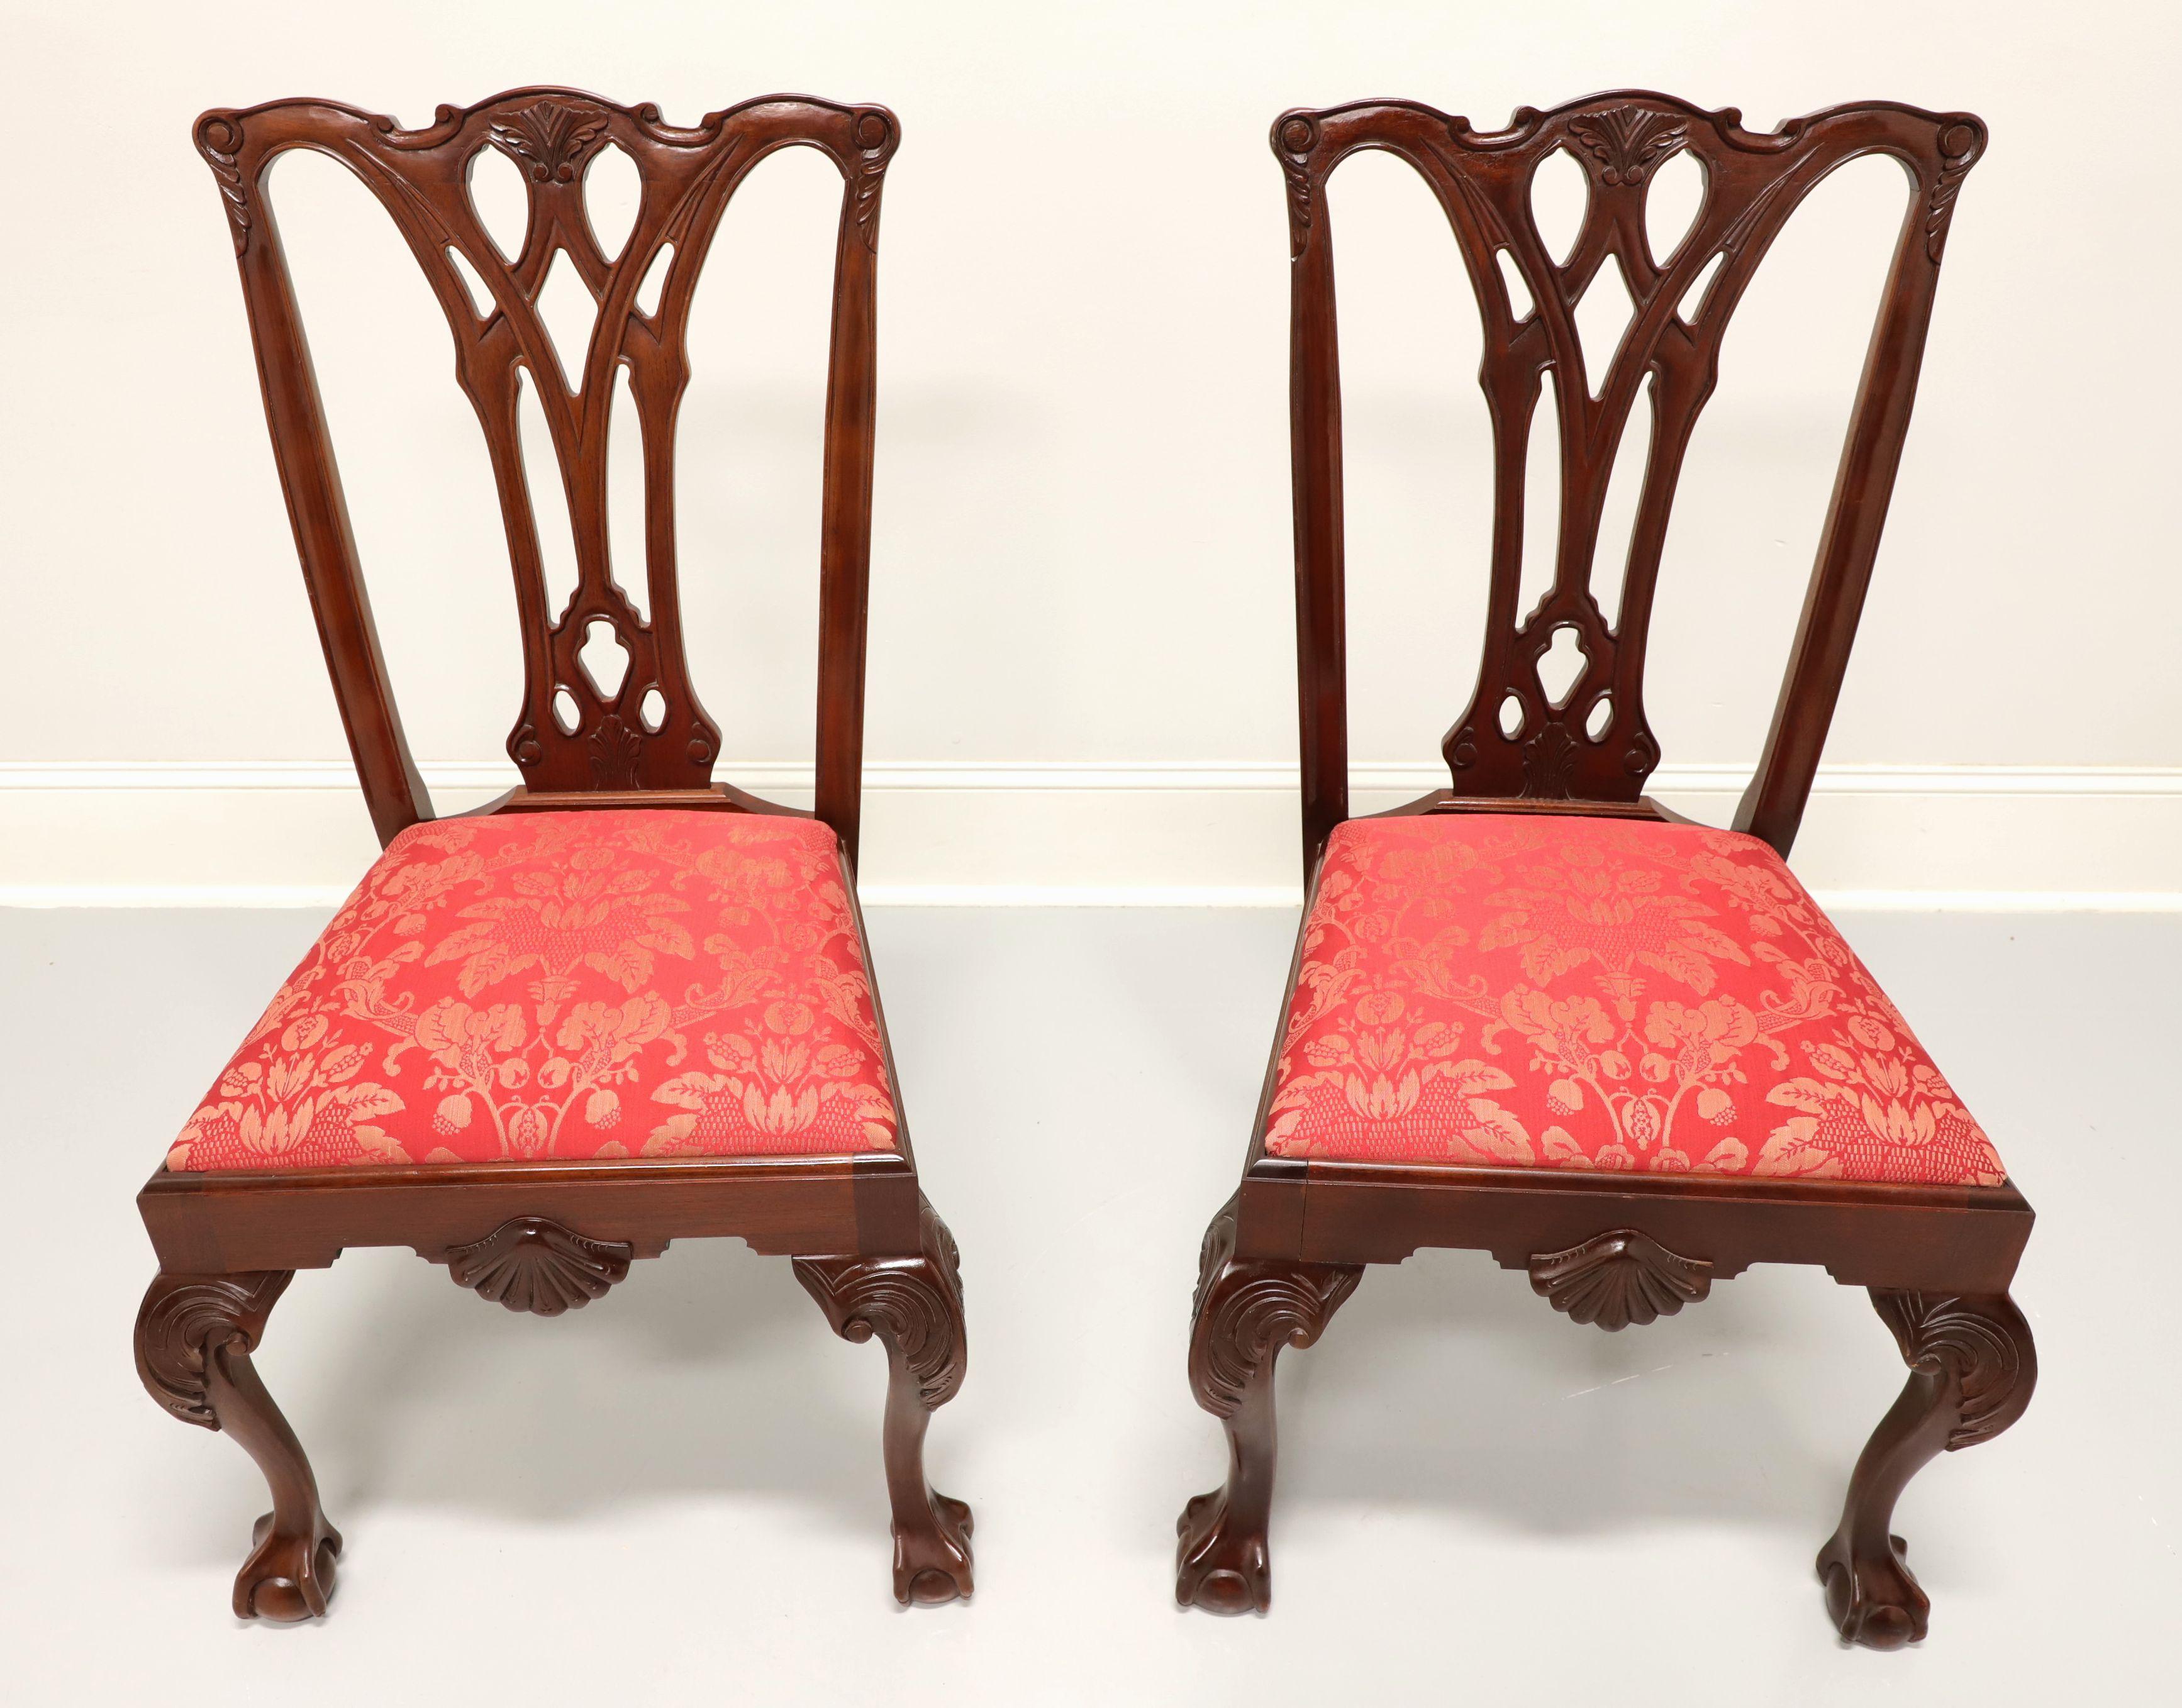 A pair of Chippendale style dining side chairs by high-quality furniture maker Craftique. Solid mahogany with their Mellowax finish, carved crest rail, carved back, red & gold colored brocade like fabric upholstered seat, carved shell to front